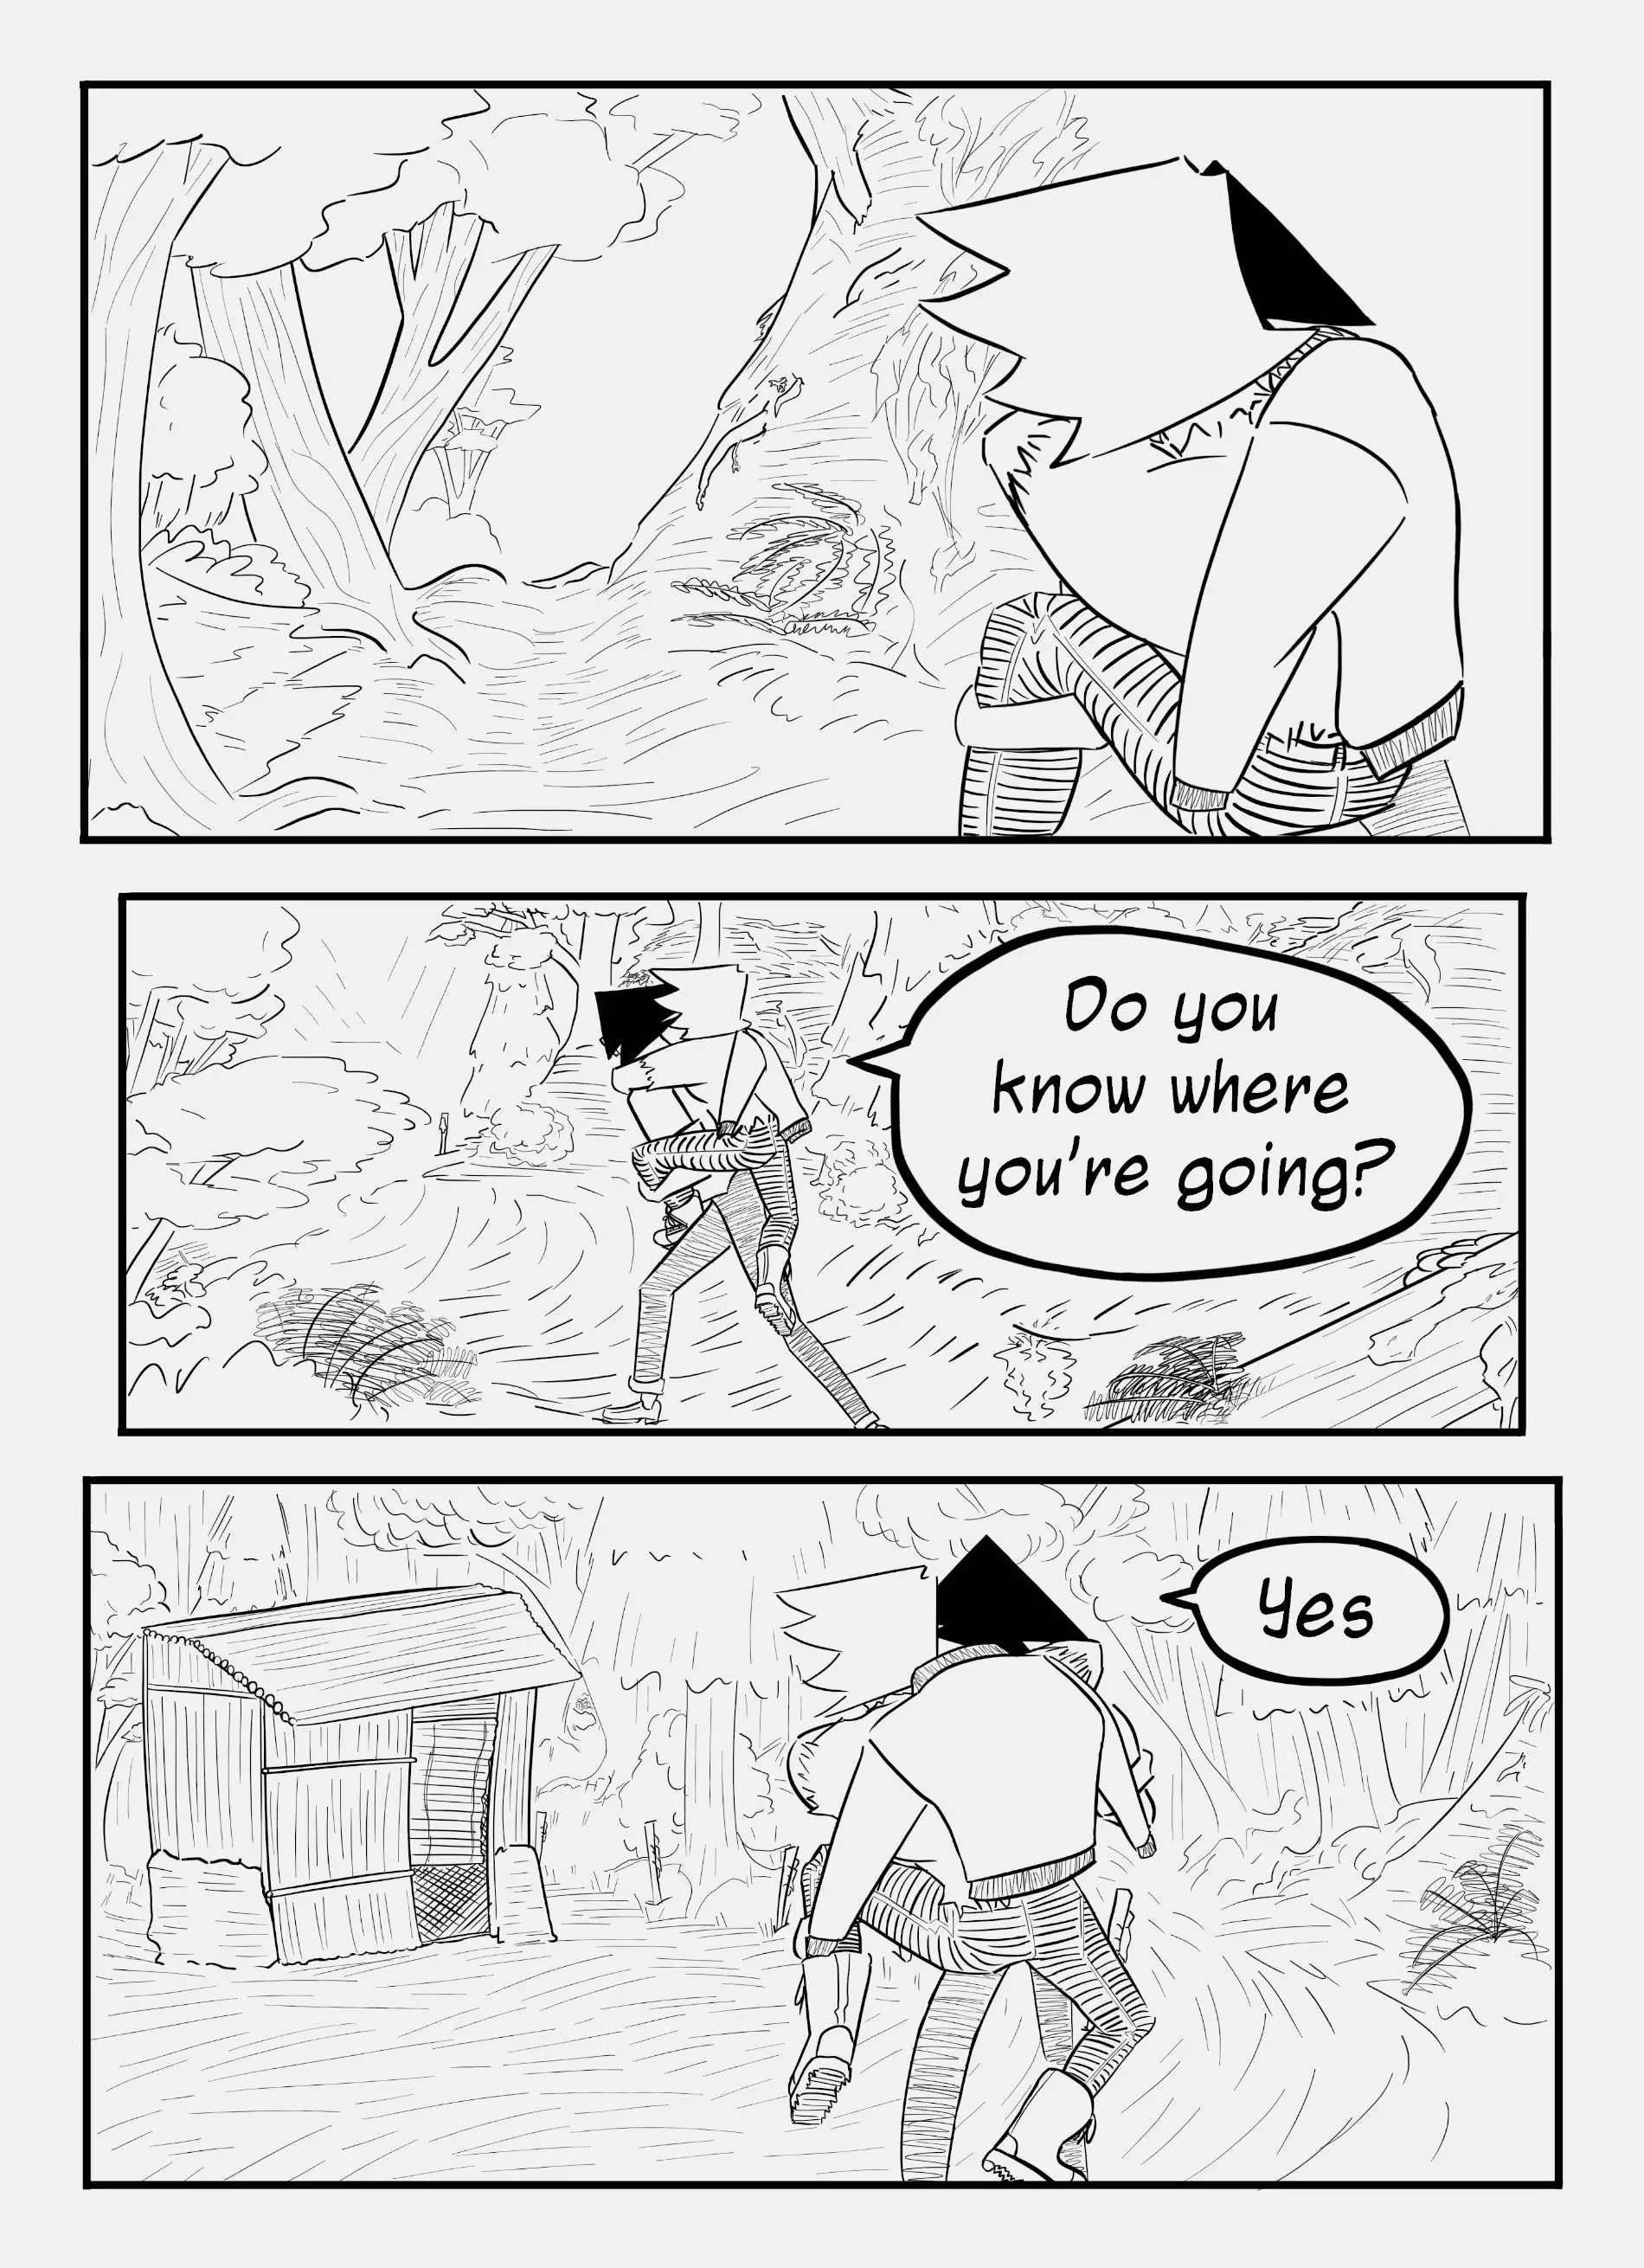 3 Guys Who Hang Out In The Woods Of Night Woods - 1 page 49-52504c51